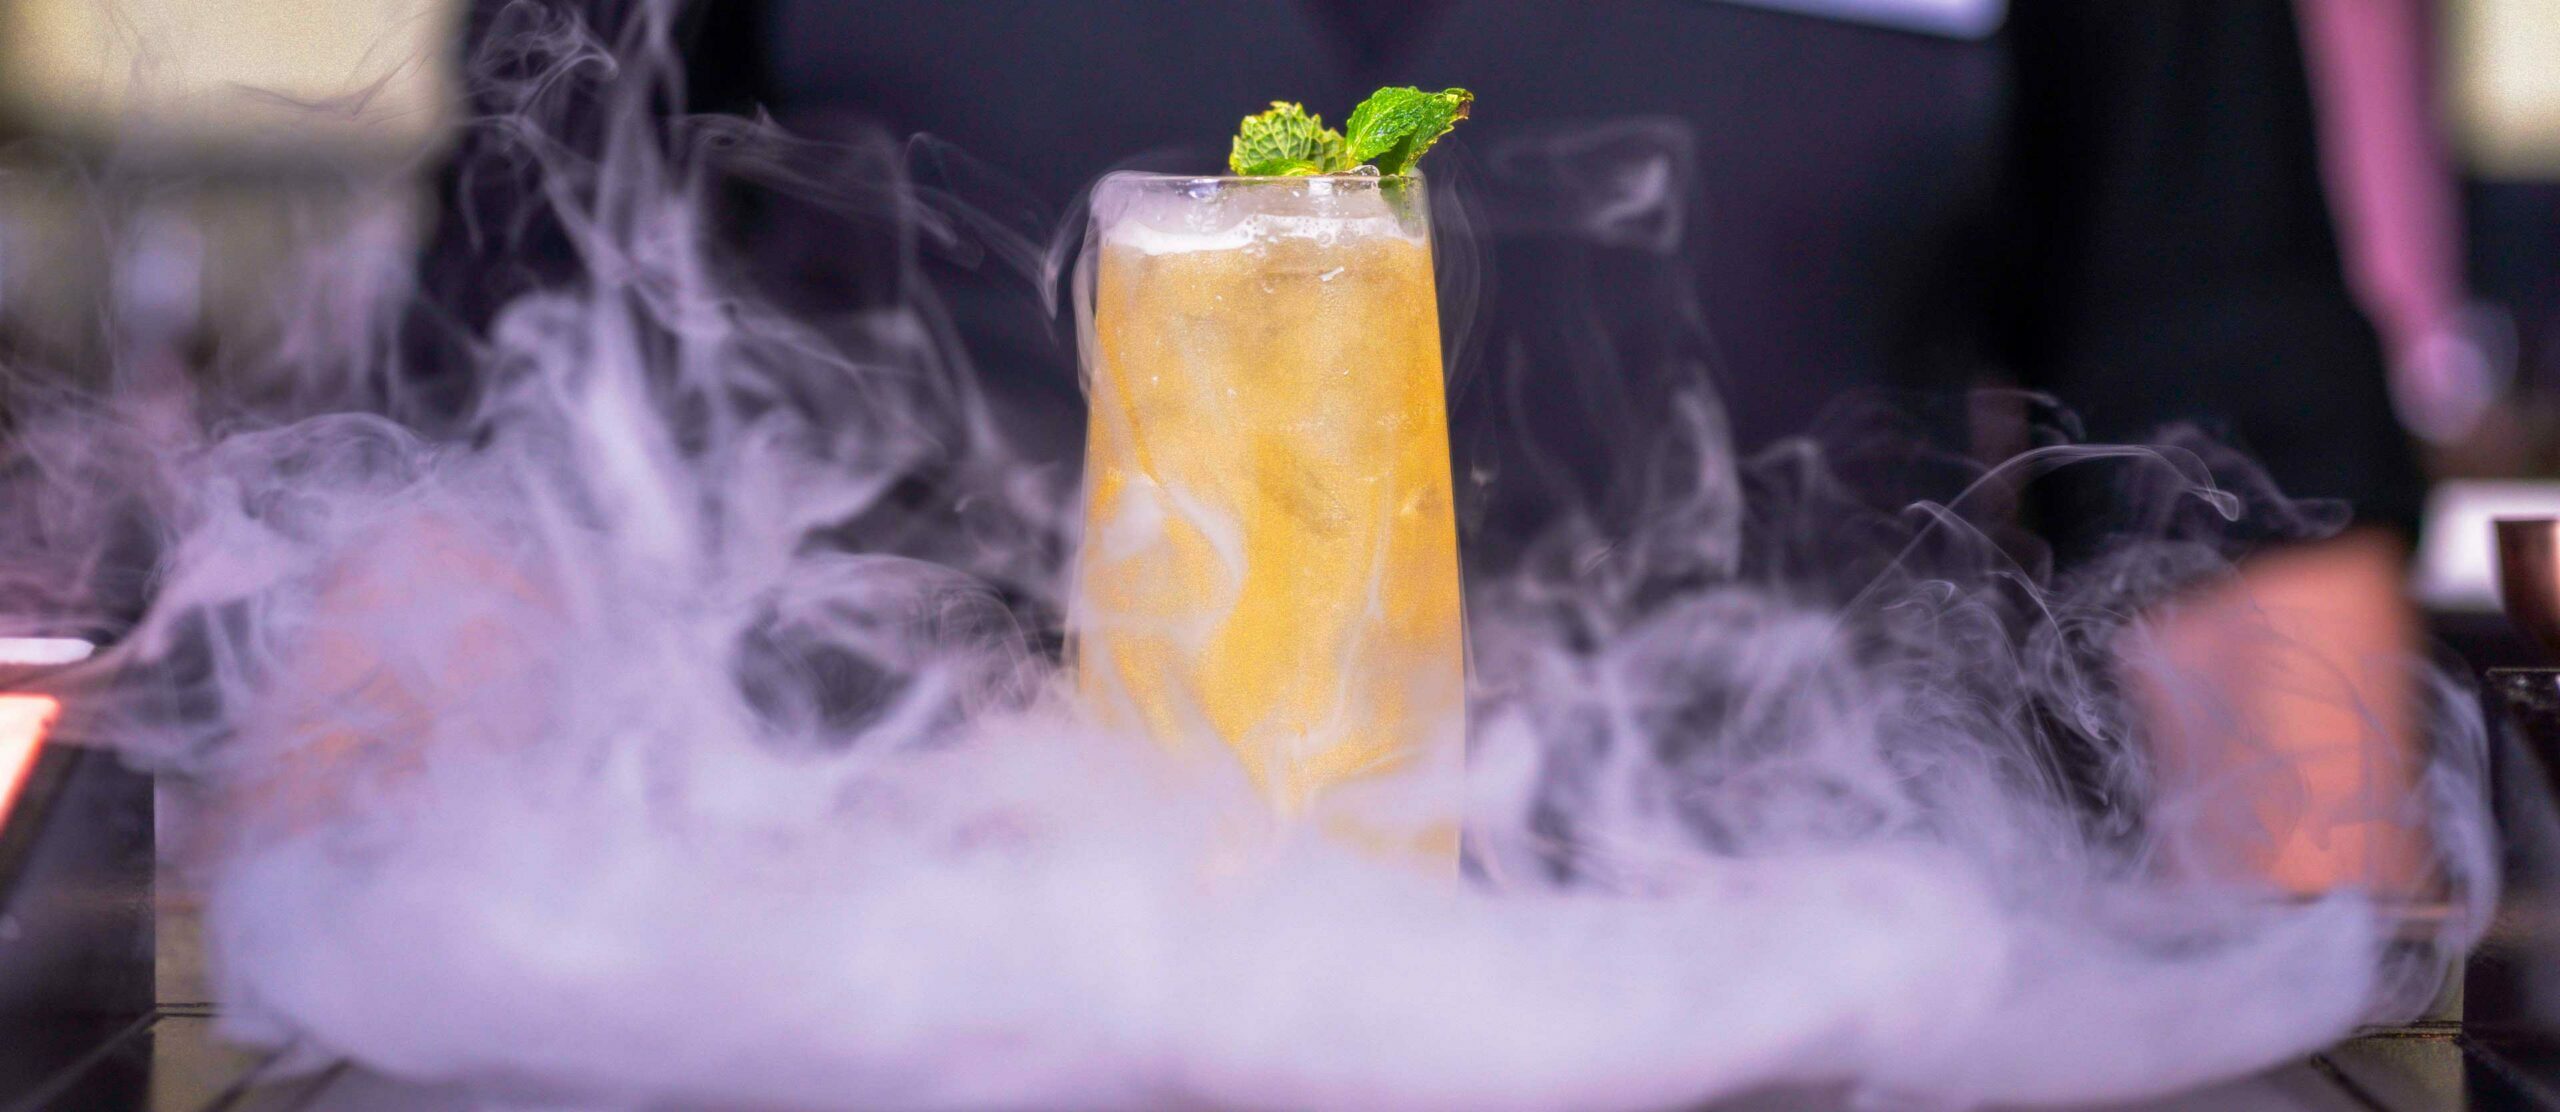 The Steakhouse Smoked Cocktails